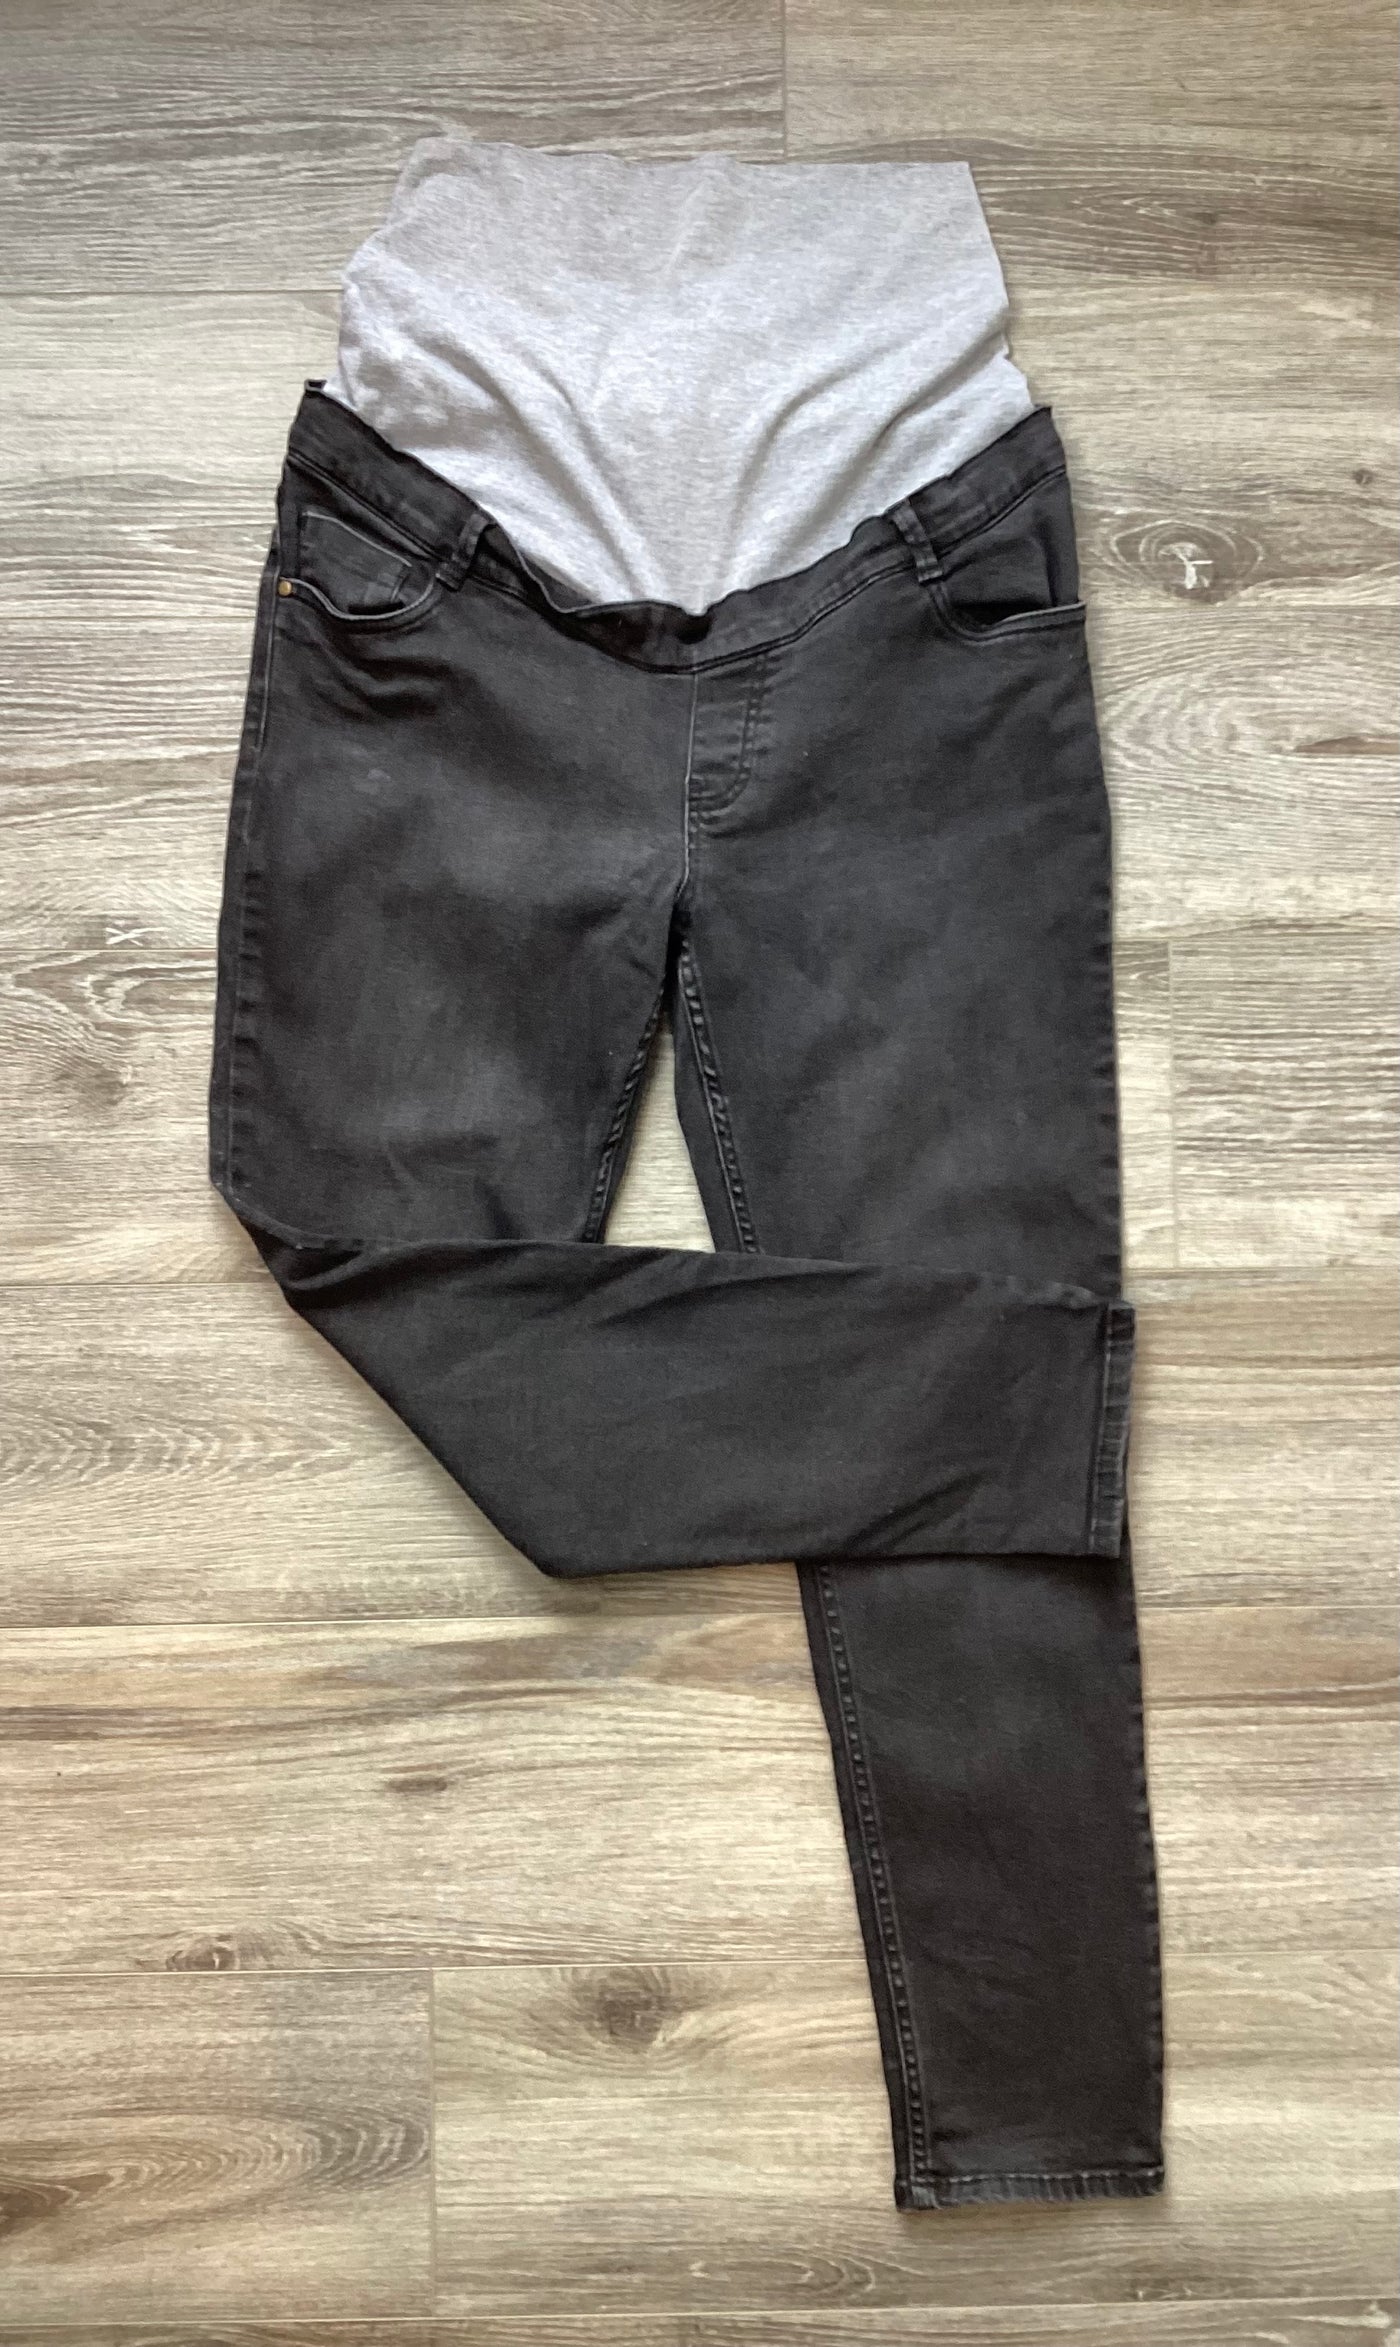 Gebe Maternity black overbump jeans - Size 14